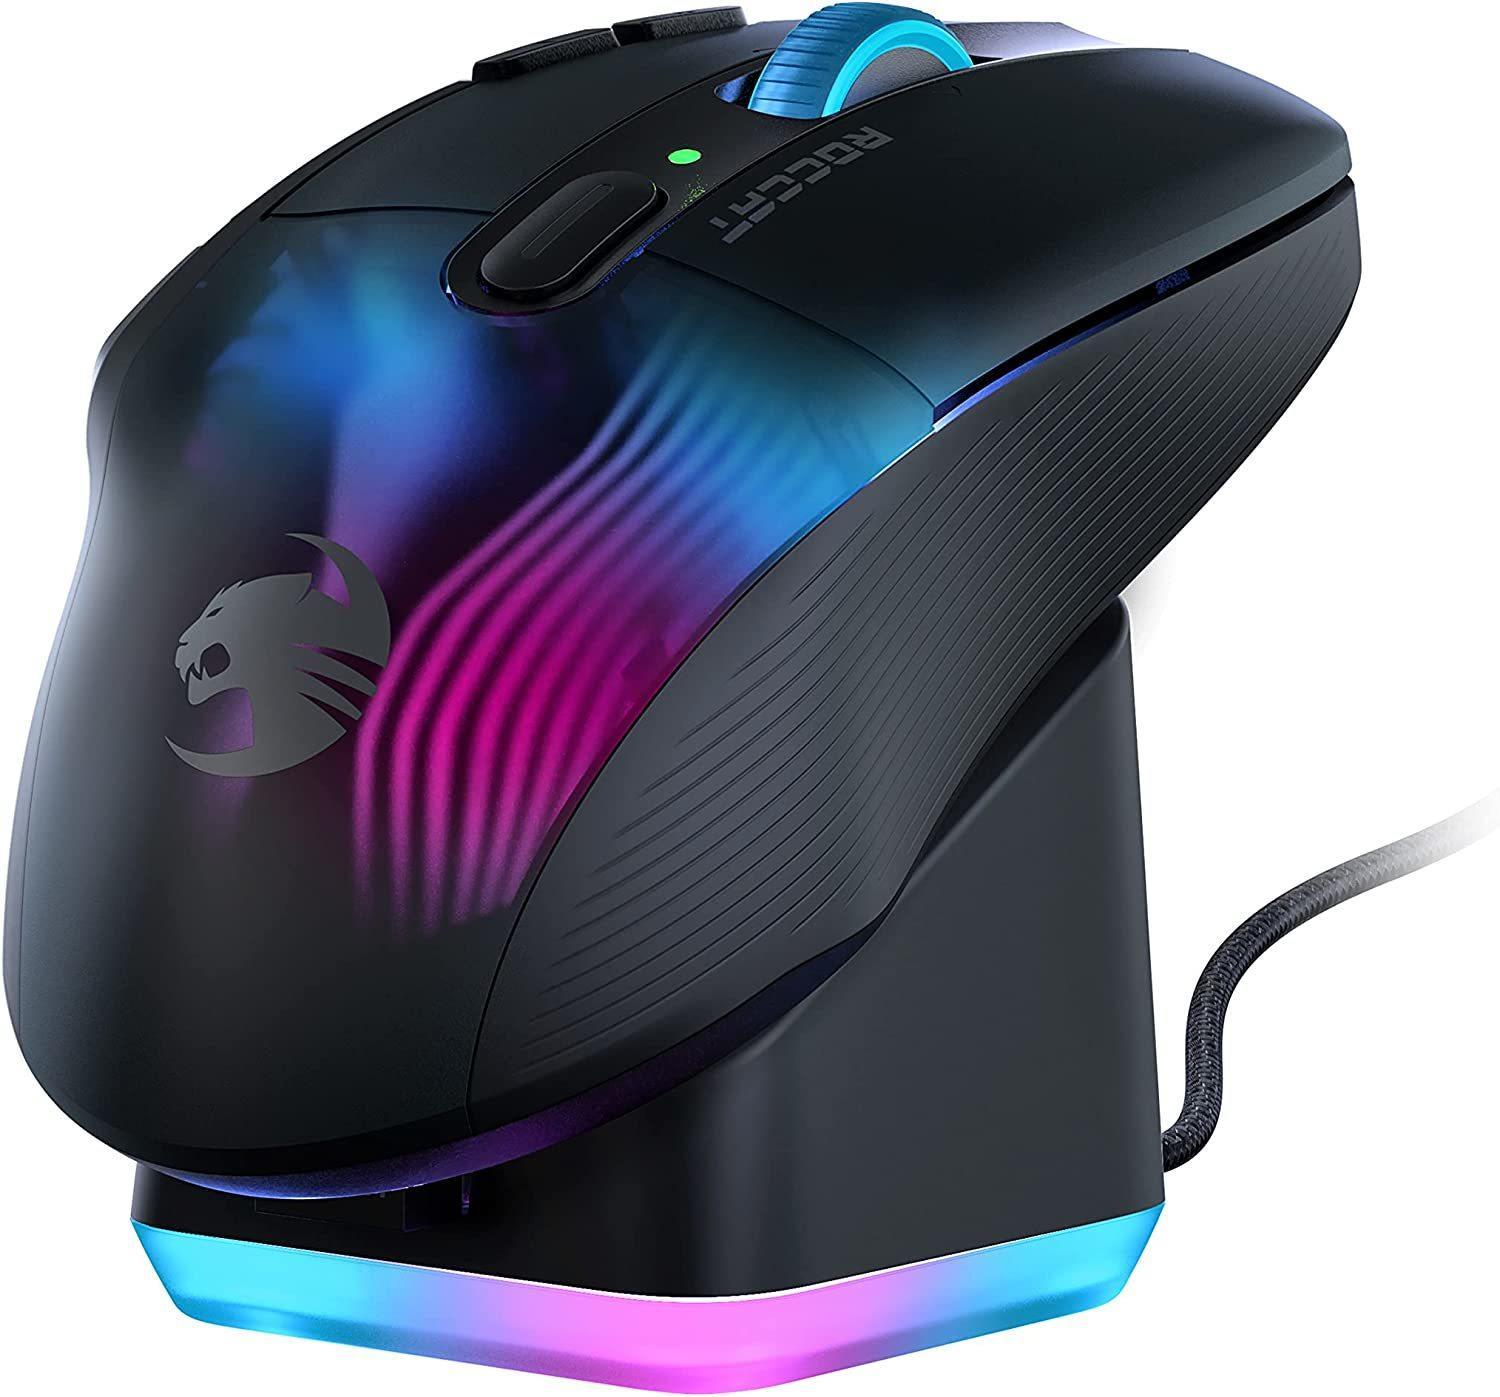 ROCCAT Kone XP Air Wireless Gaming Mouse (Black)